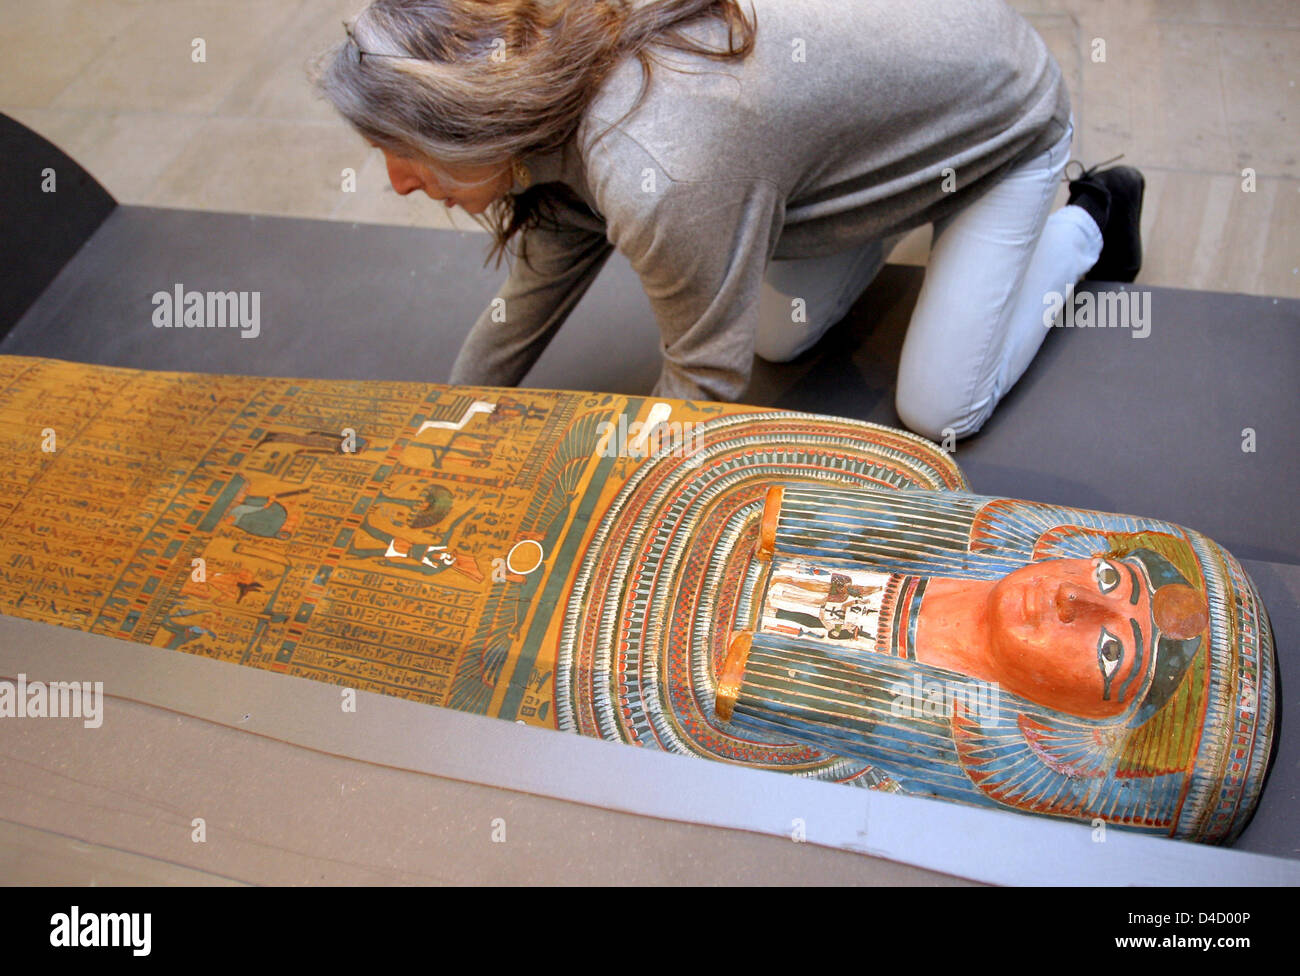 Staff of the State Museum of Prehistory Dresden arrange the inner coffin of Penju dating 800 BC in Dresden, Germany, 06 March 2008. The show-piece of Hildesheim's Pelizaeus Museum is on loan to the museum and forms part of the 400 exhibits displayed in the special exhibition 'Beauty in the Old Egypt - Desire for Perfection' from 14 March 2008 through 04 January 2009. Photo: MATTHIA Stock Photo